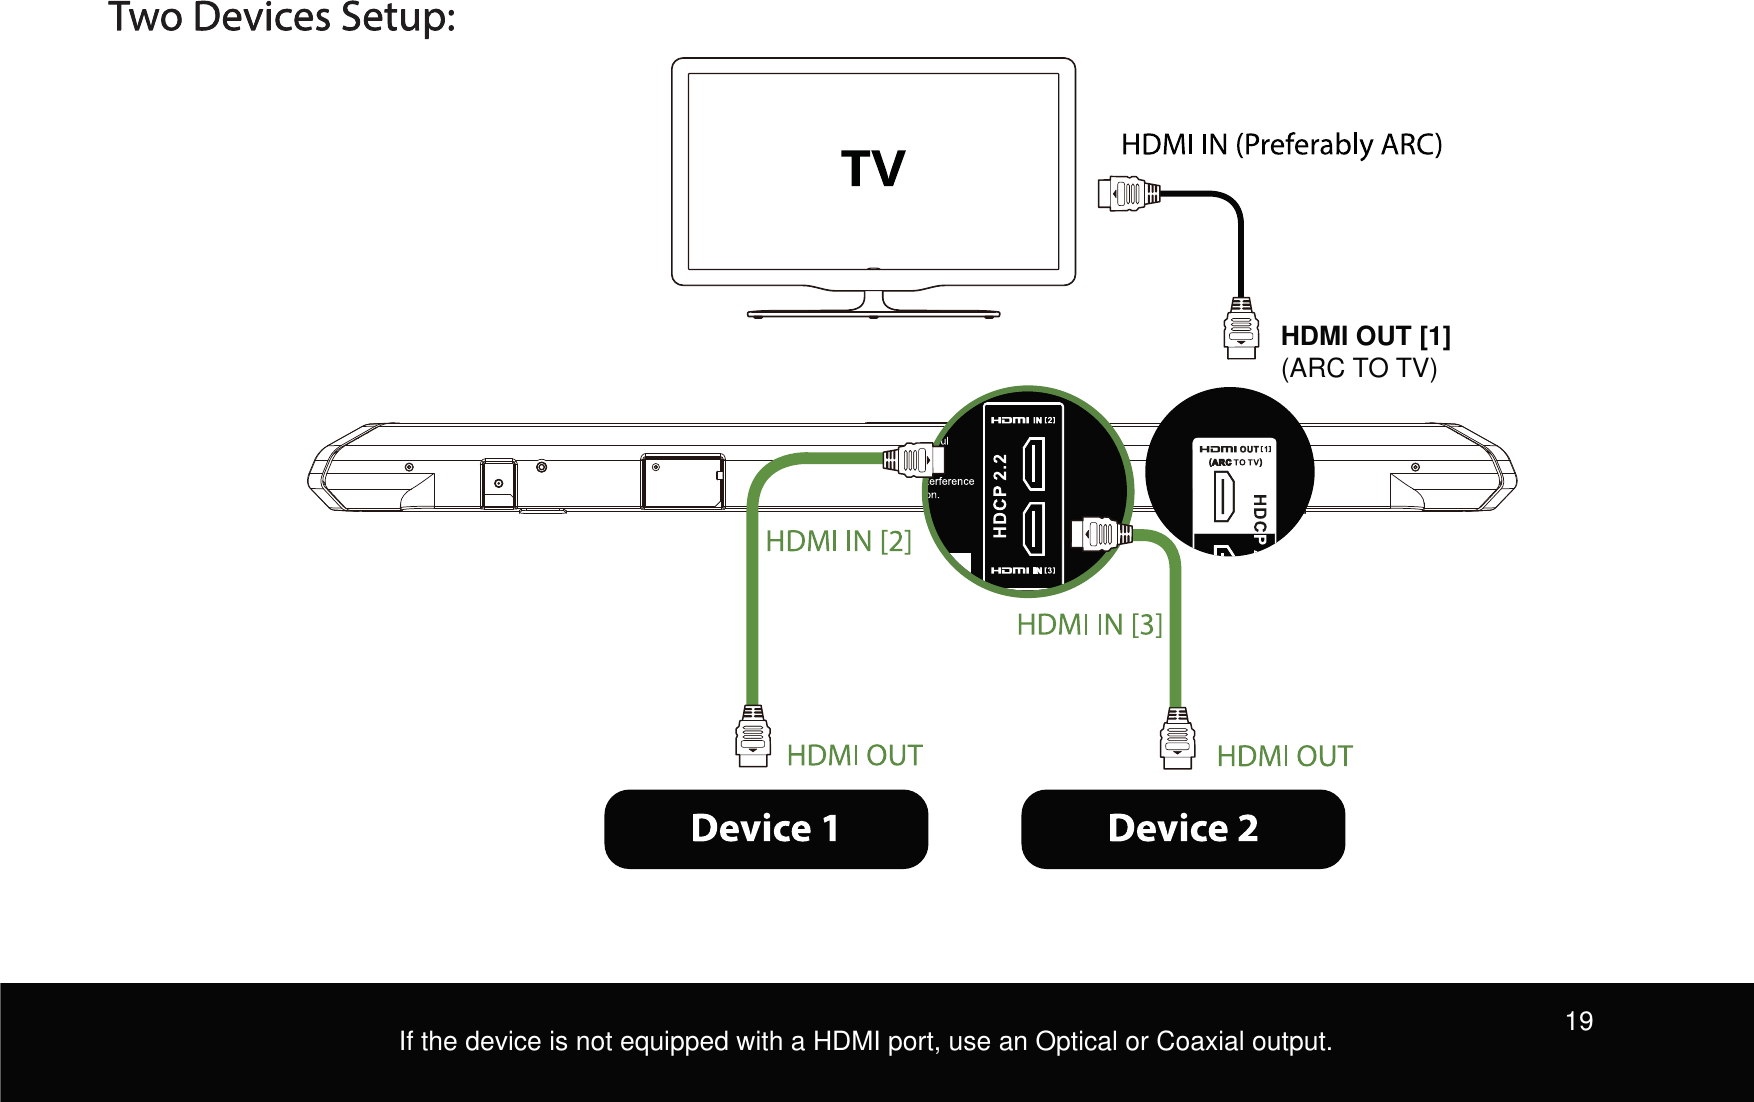 HDMI OUT [1] (ARC TO TV)If the device is not equipped with a HDMI port, use an Optical or Coaxial output. 19